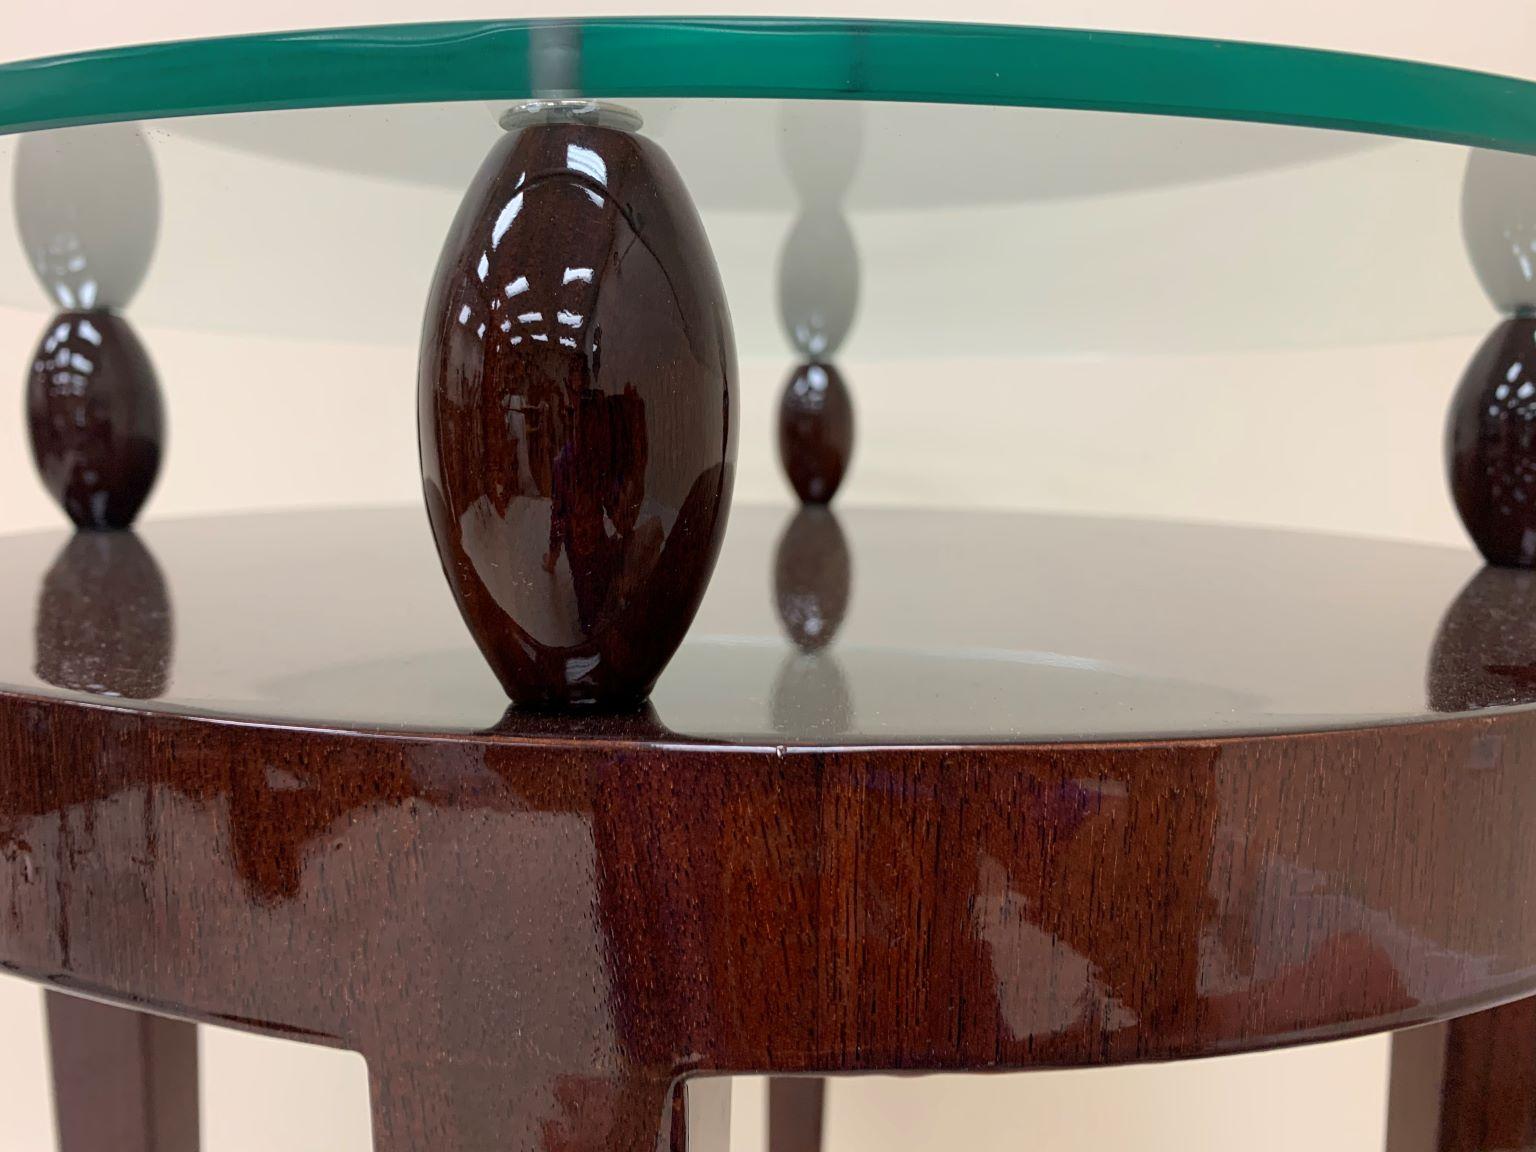 Chrome Stunning Pair of Round  Art Deco Glass-Top Side Tables In Walnut Circa 1940's For Sale